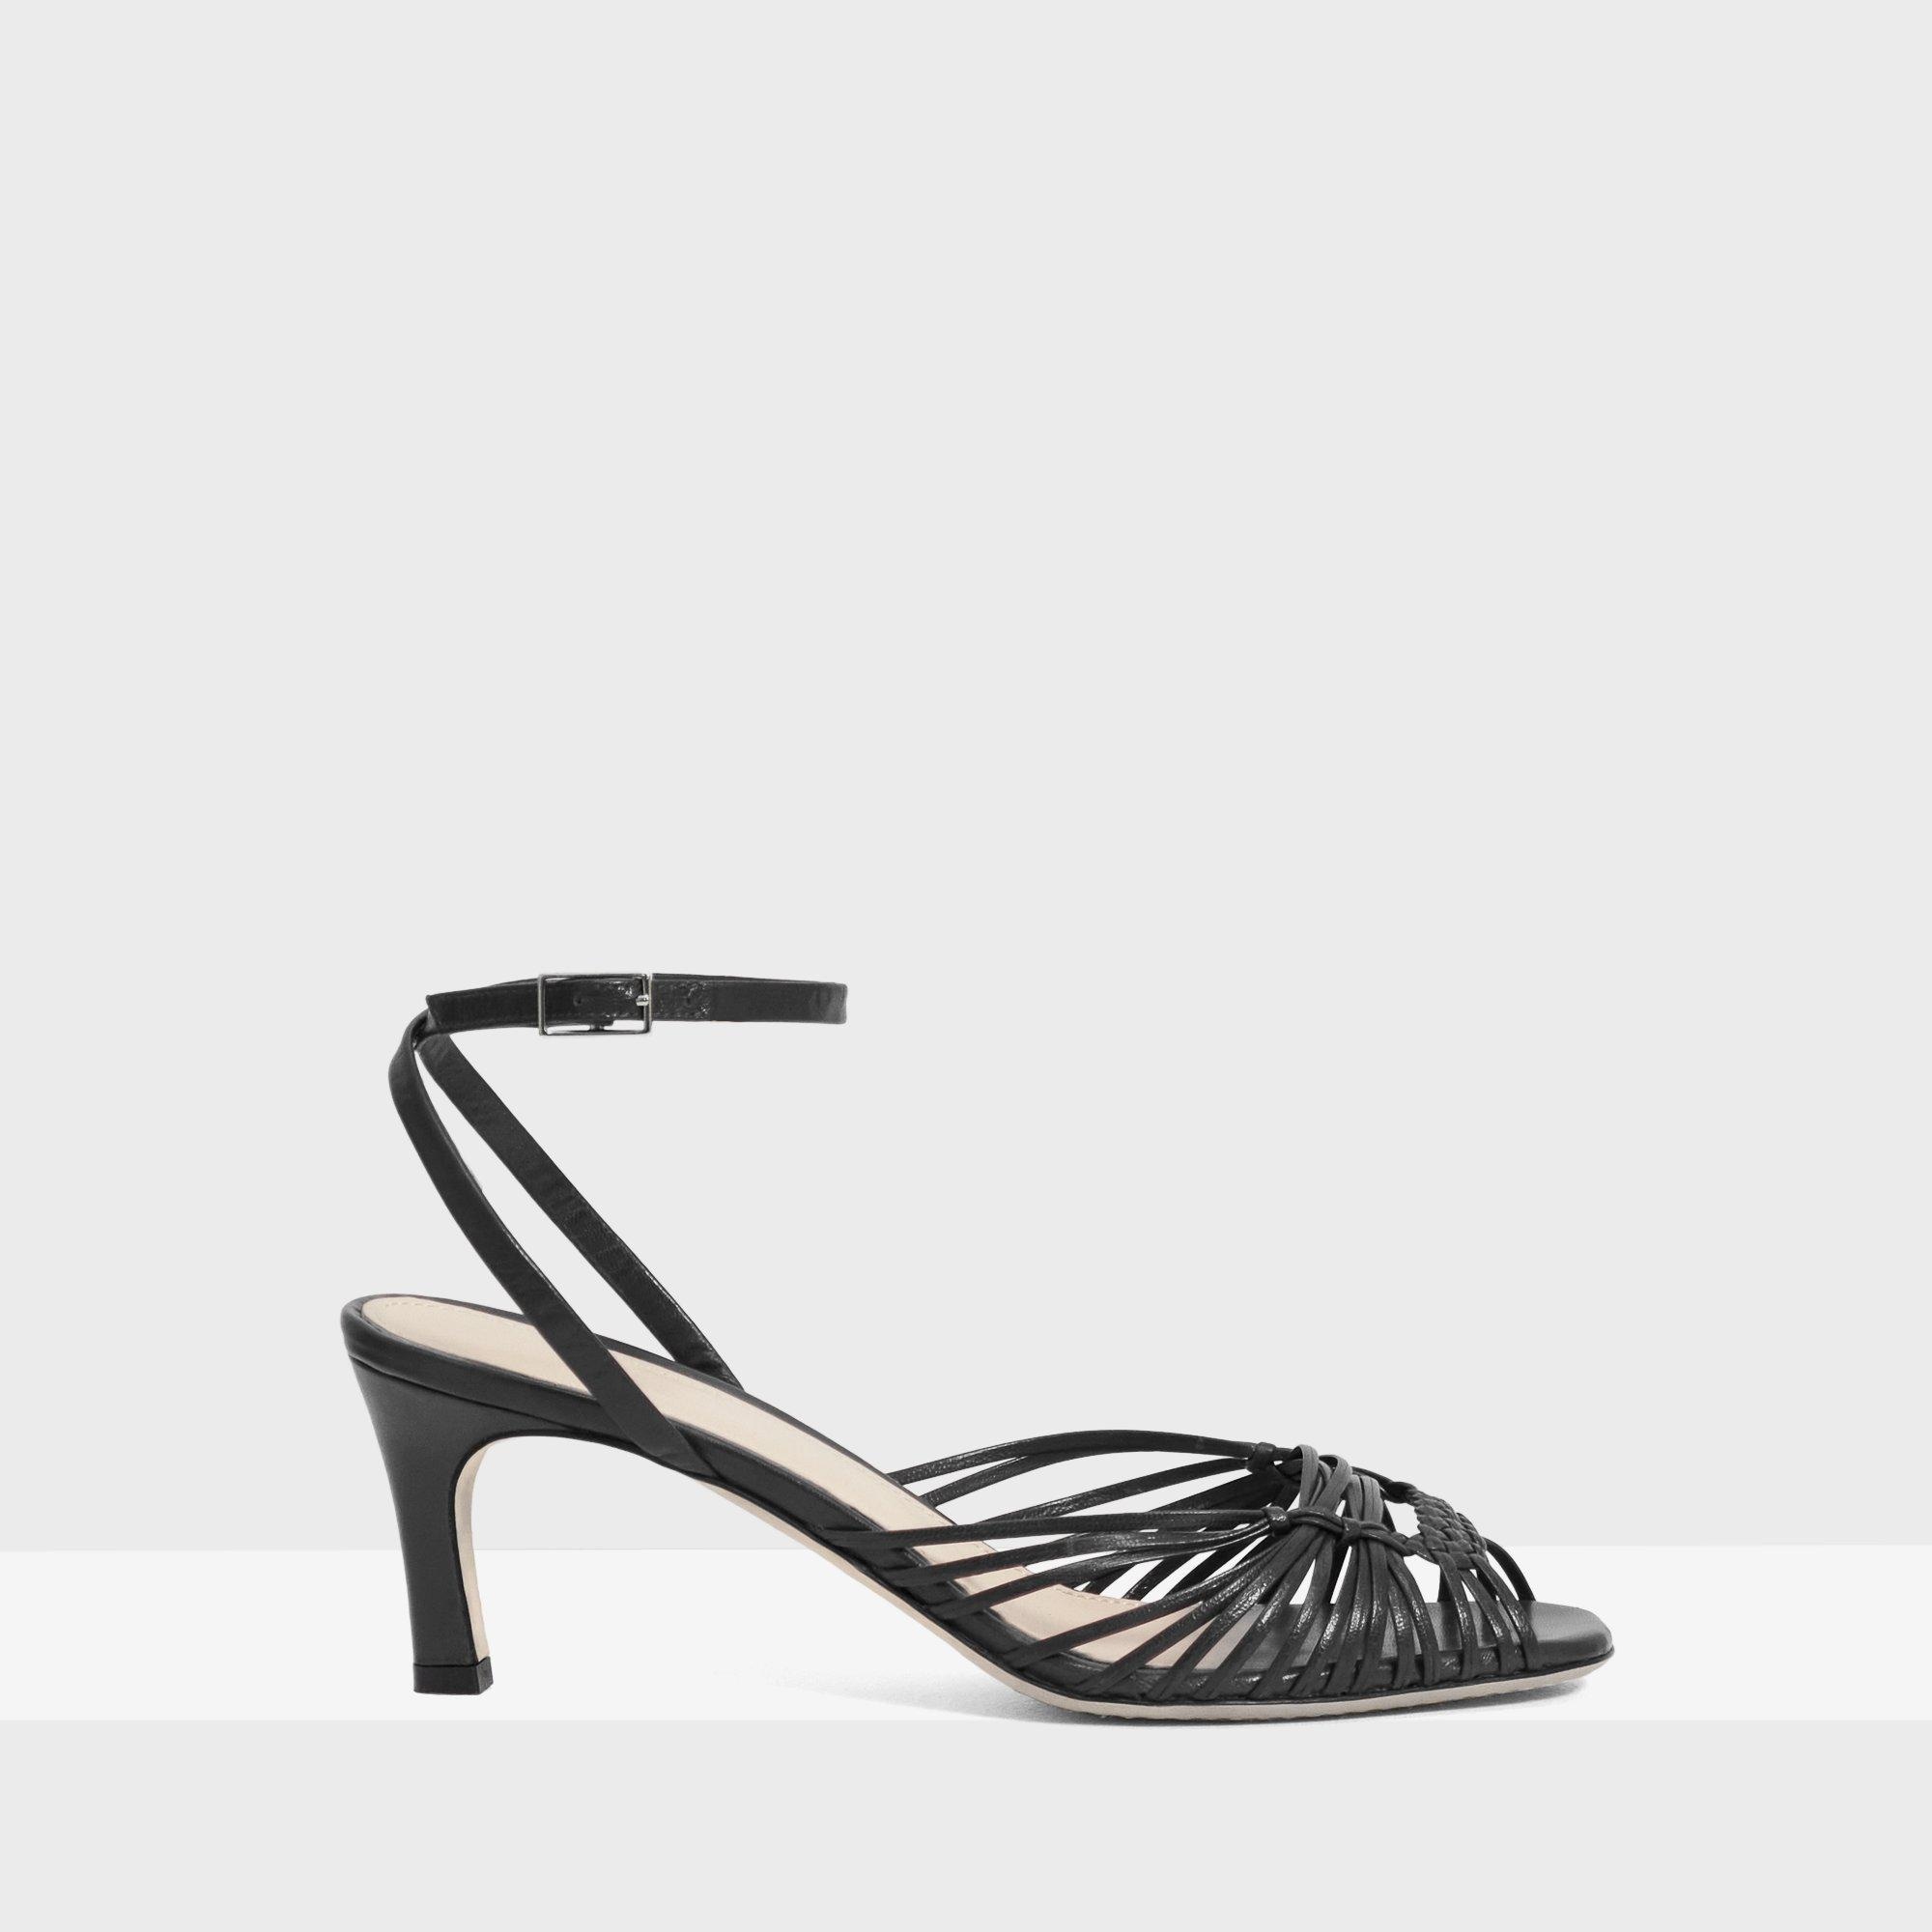 Theory Hand-Braided Sandal in Leather